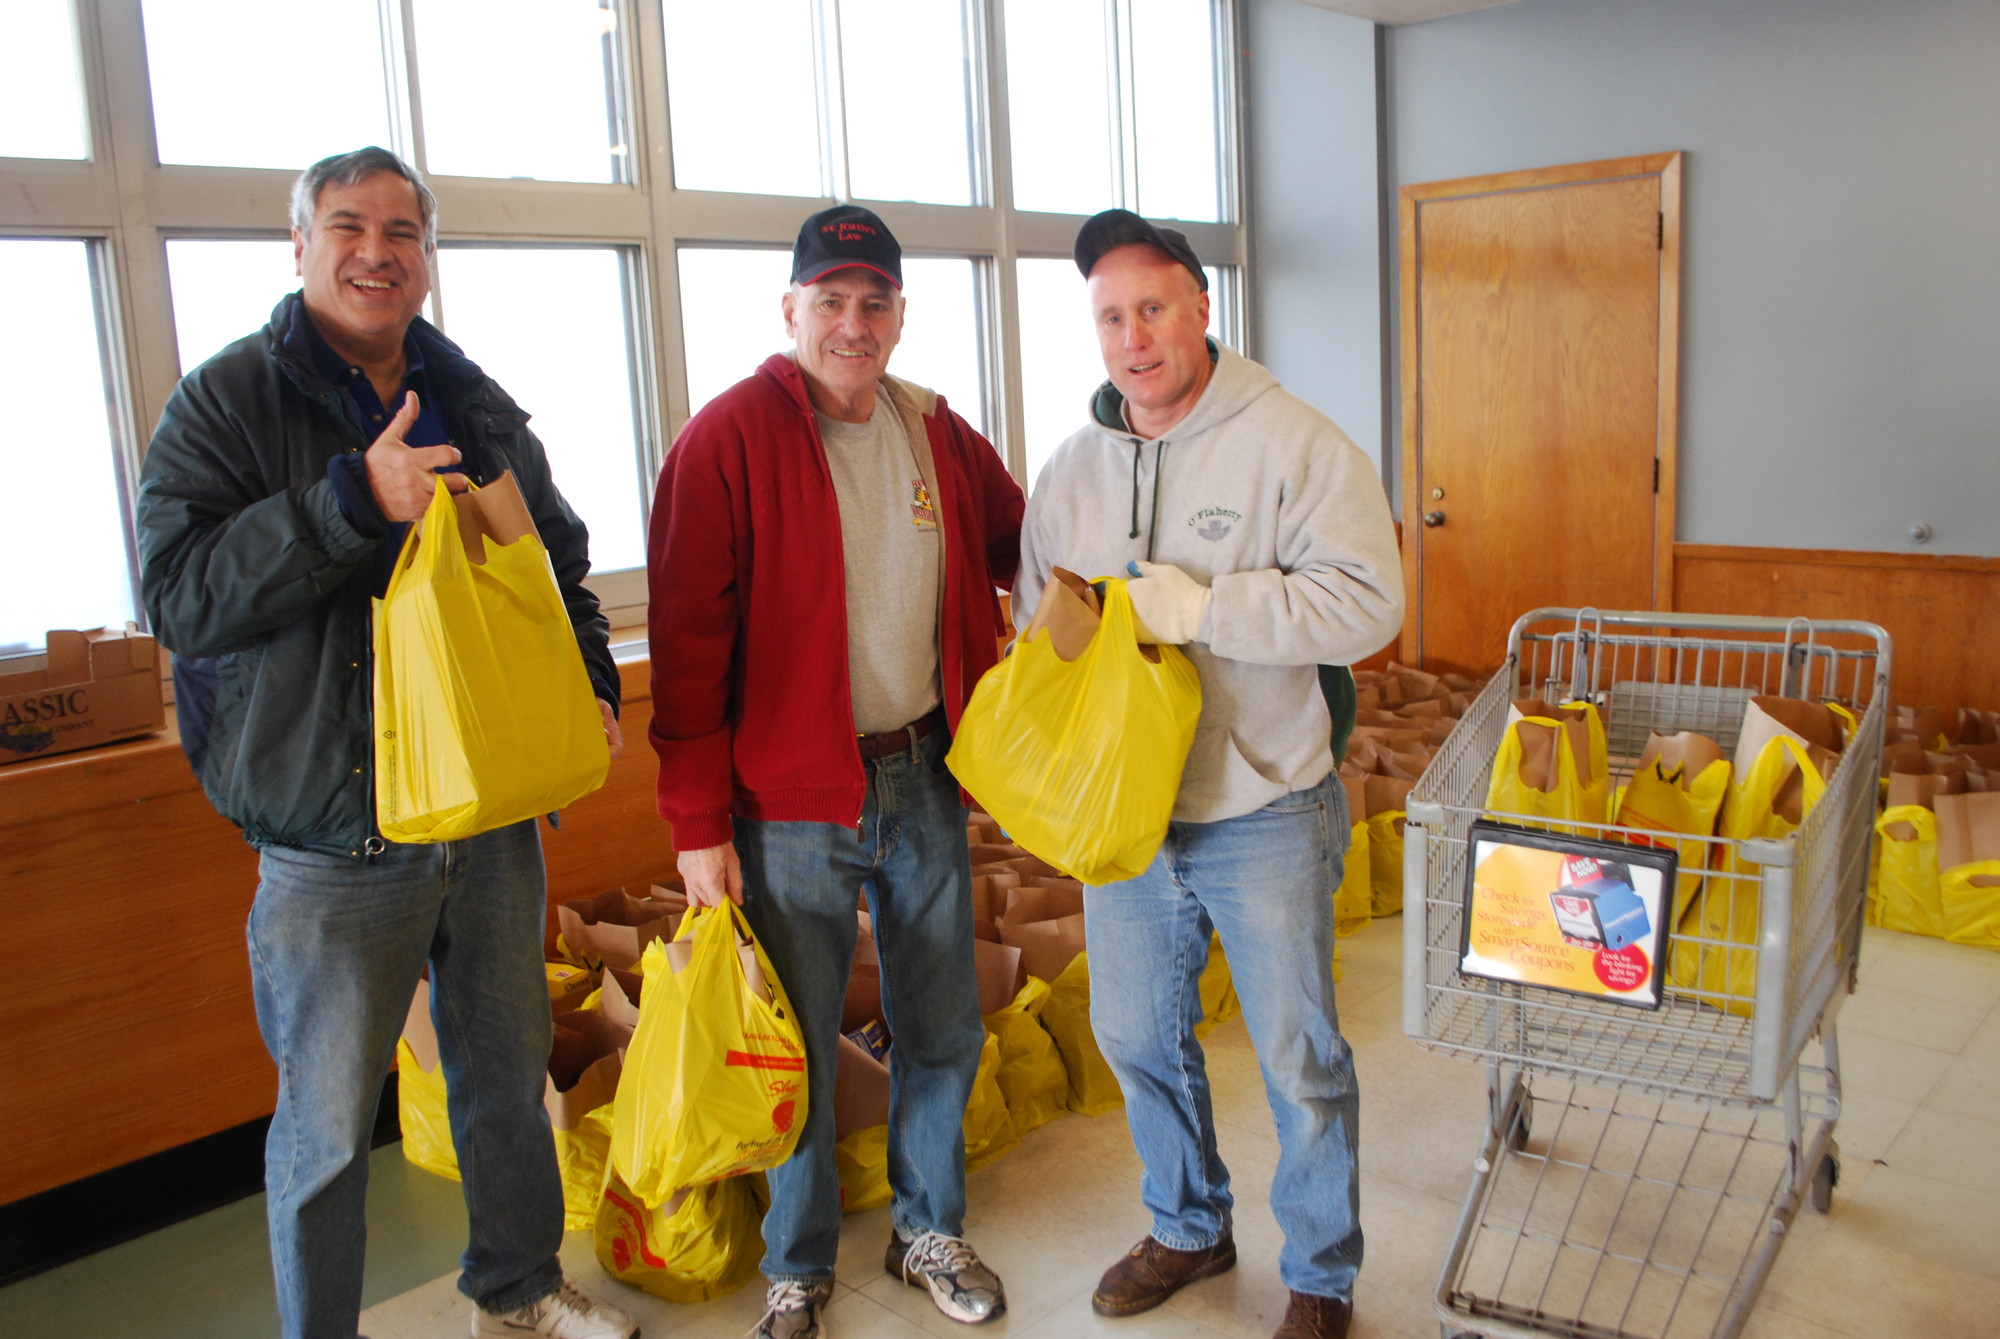 Dr. Steven Perrick, Alan Hodish  — the basket initiative chairmen — and Kiwanis President Brian O'Flaherty loaded up the packages on Saturday morning.